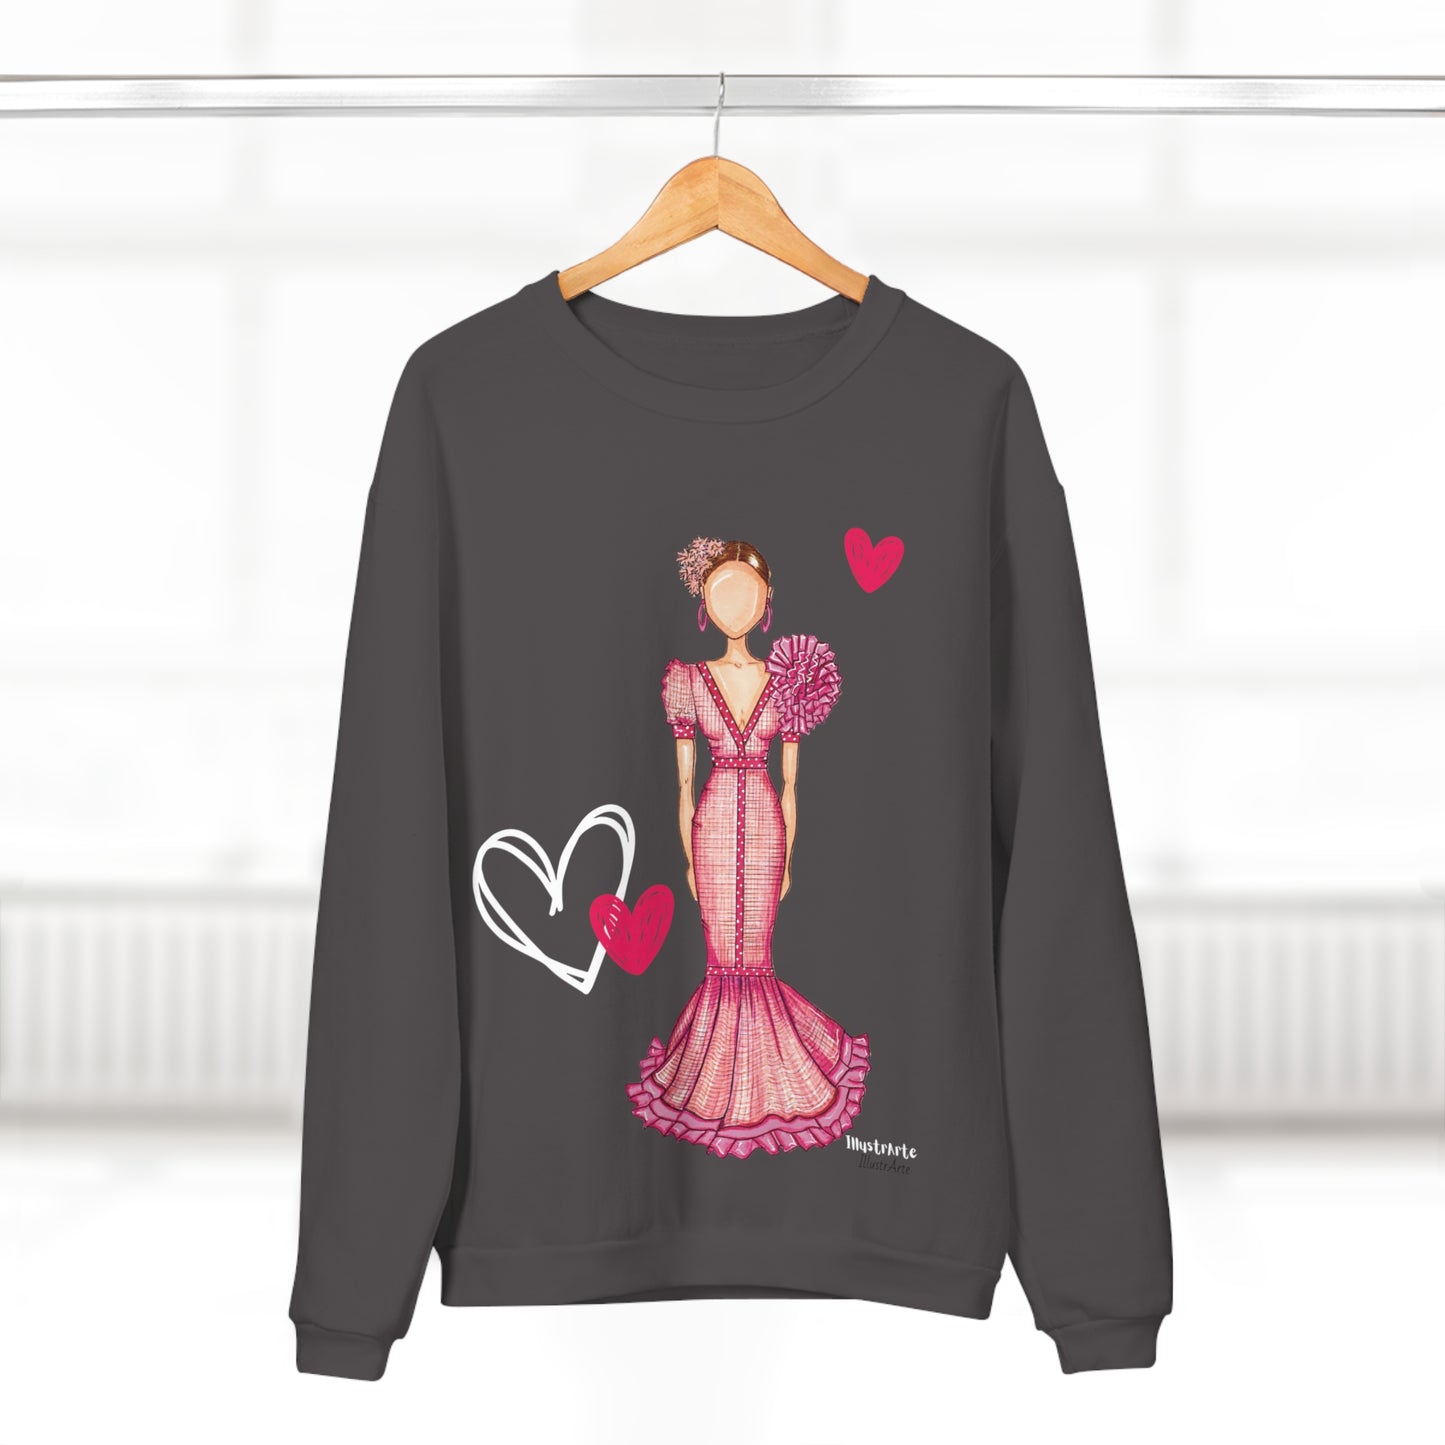 a sweater with a woman in a pink dress and a heart